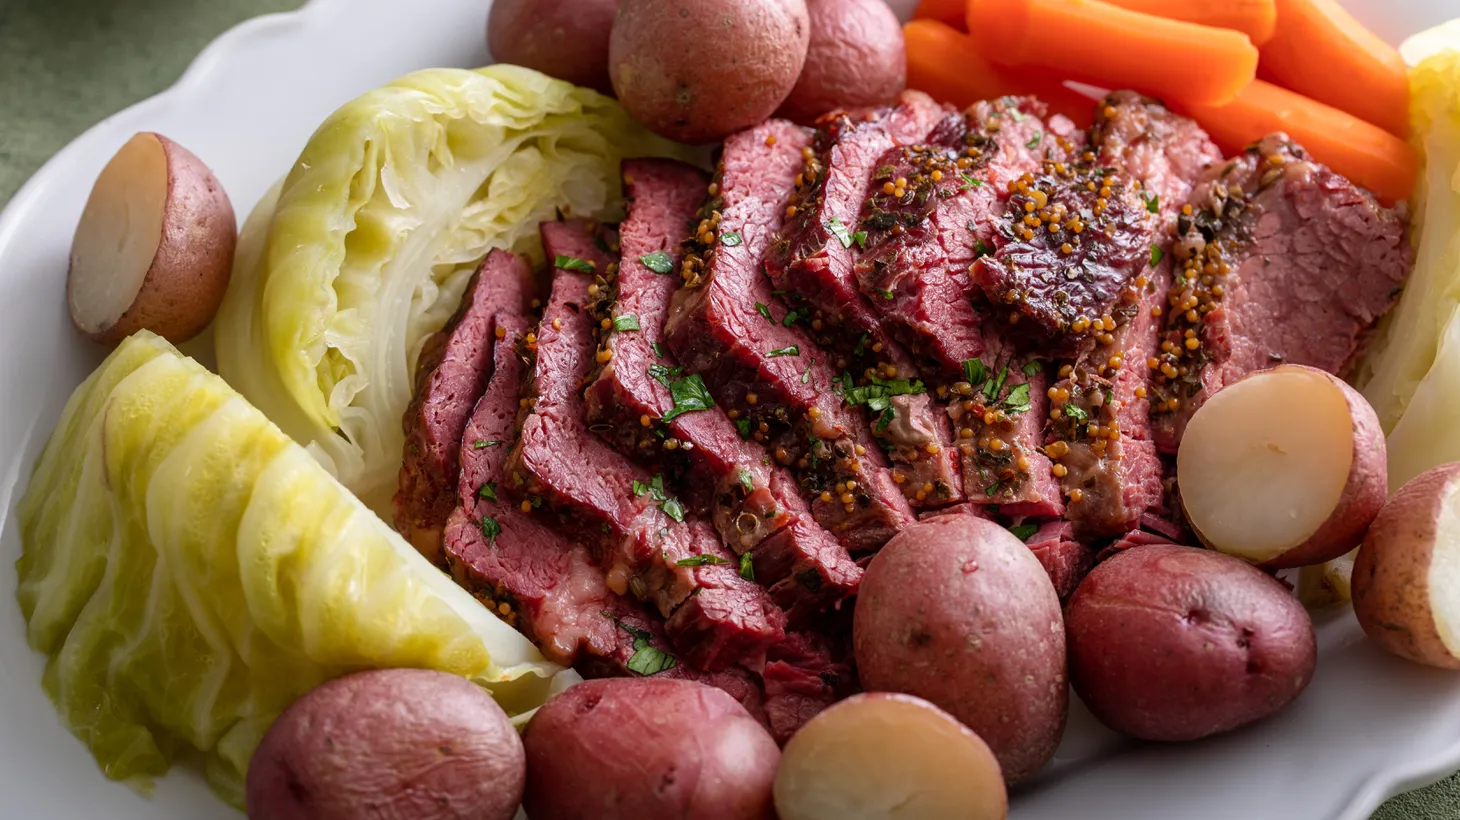 For a tasty St. Patrick's Day dinner, start with corned beef, cabbage and potatoes. The carrots are optional.